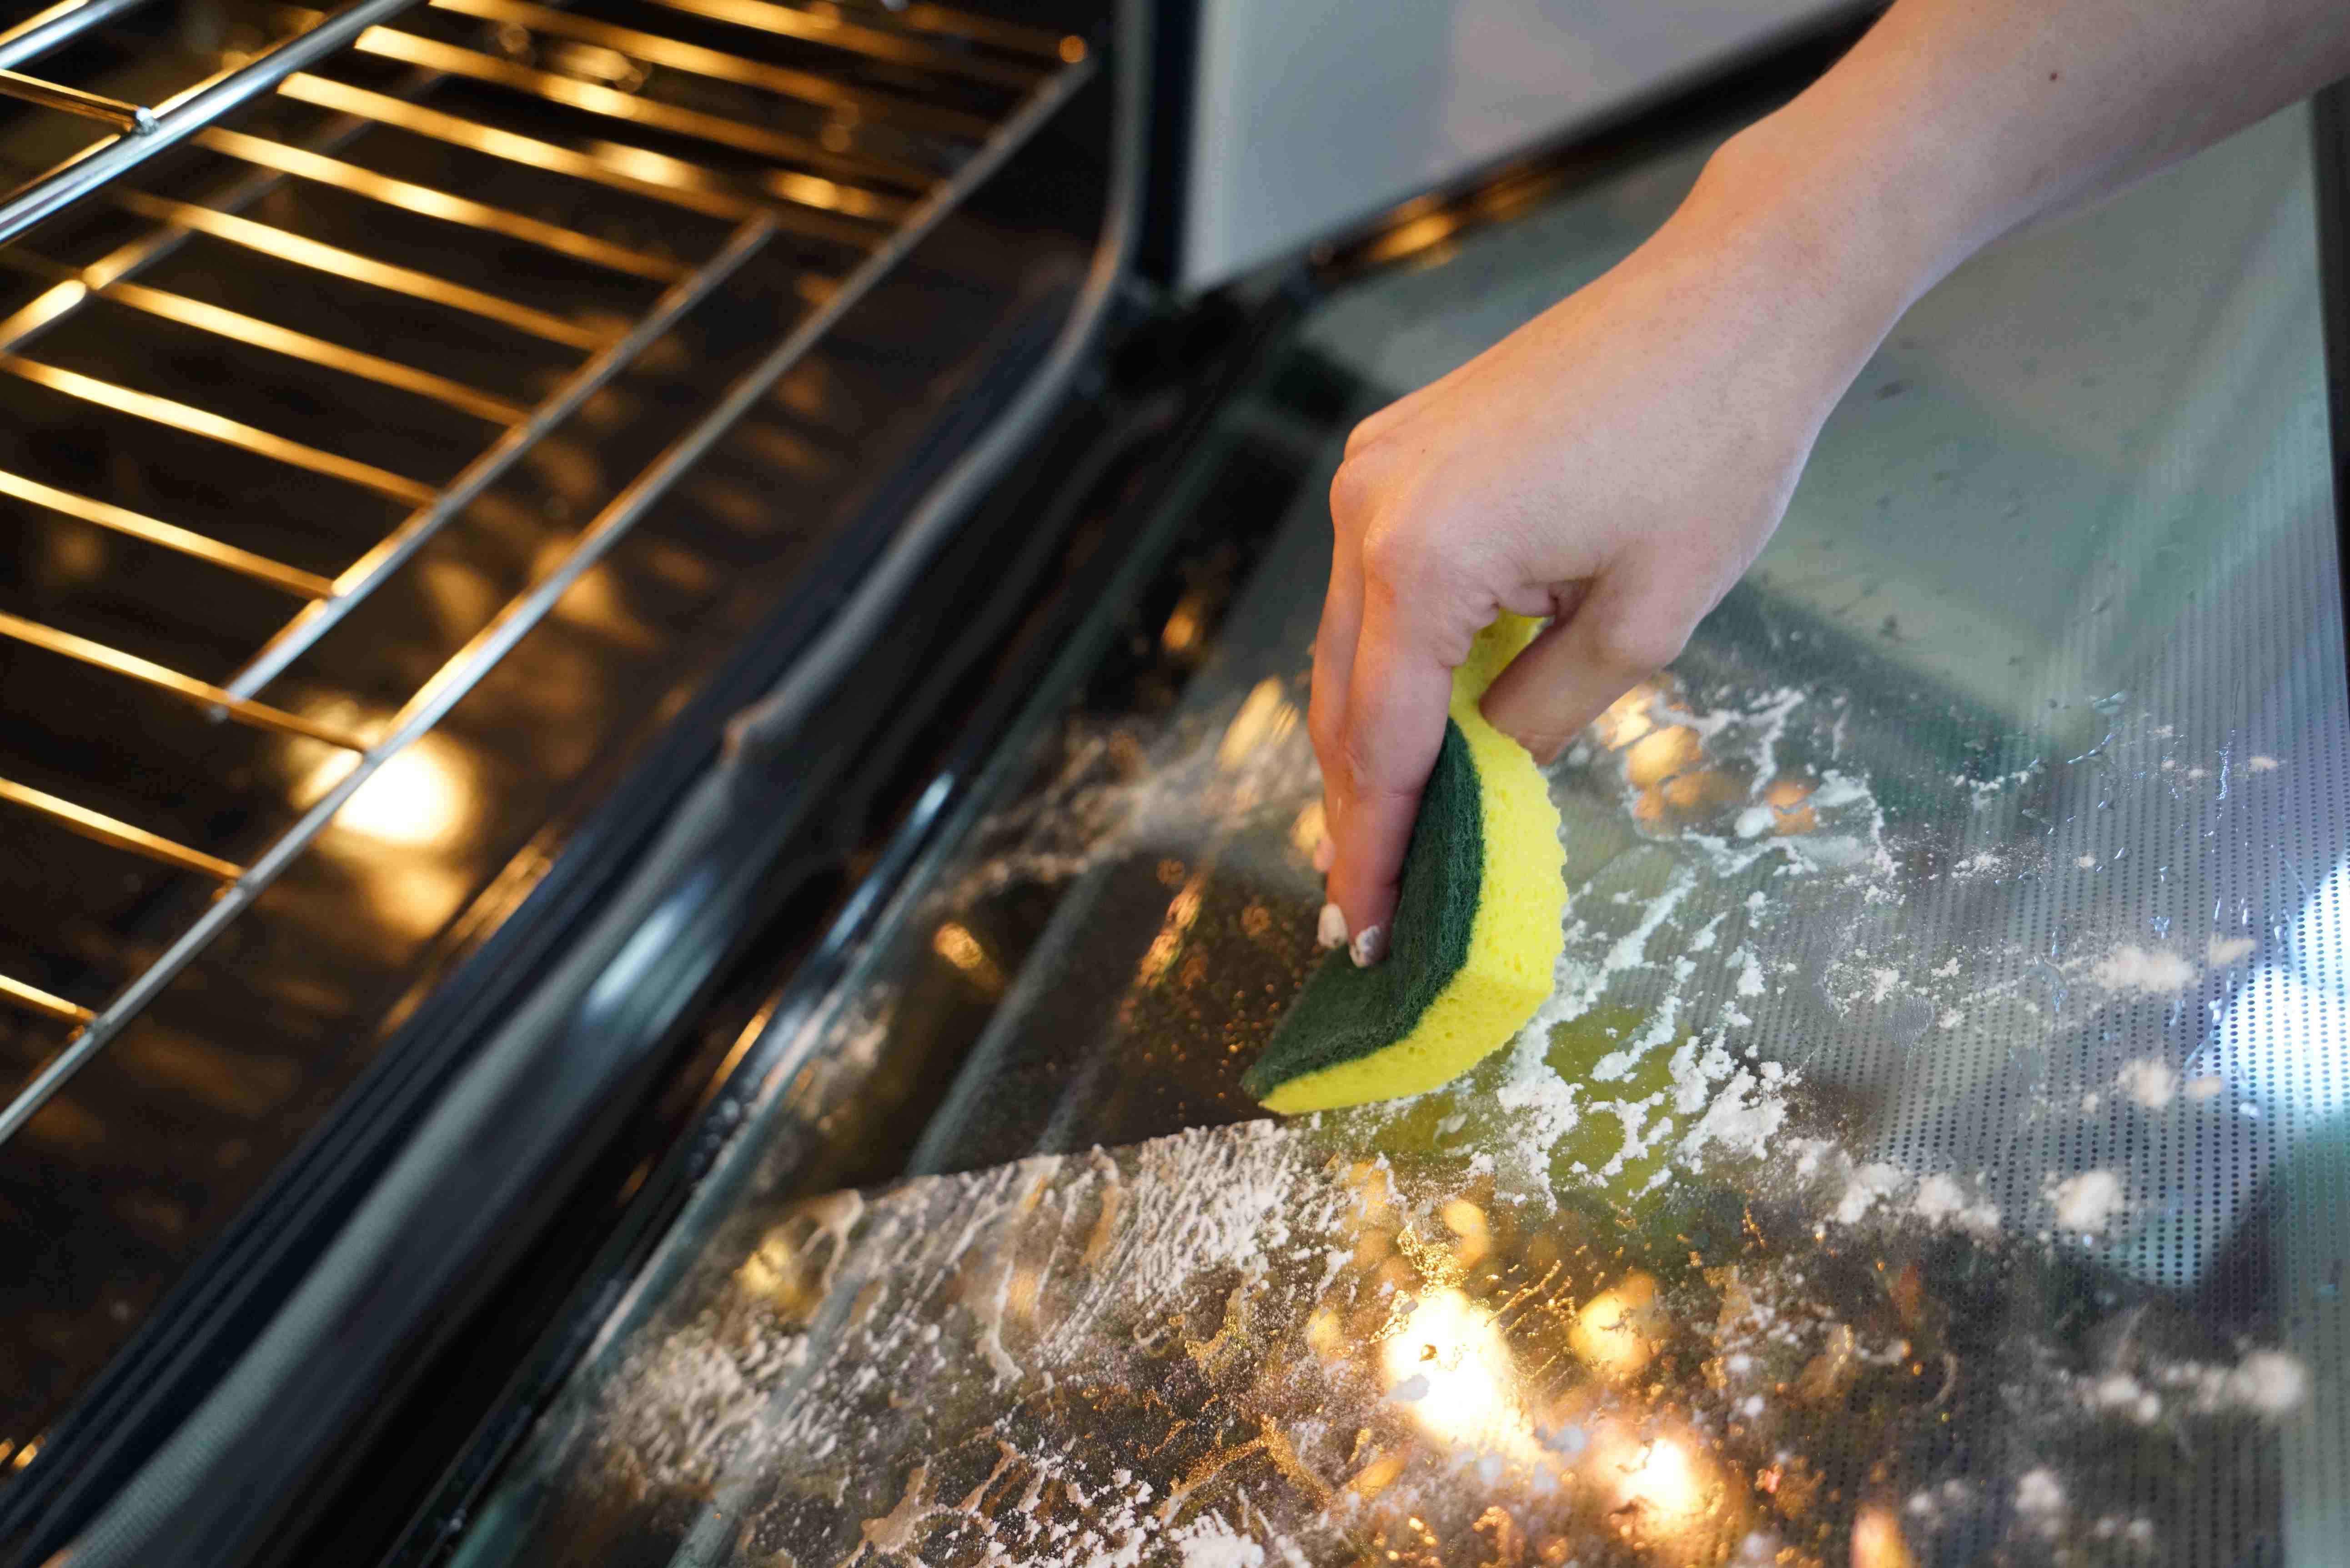 How to Remove Smells from Ovens Using Natural Products